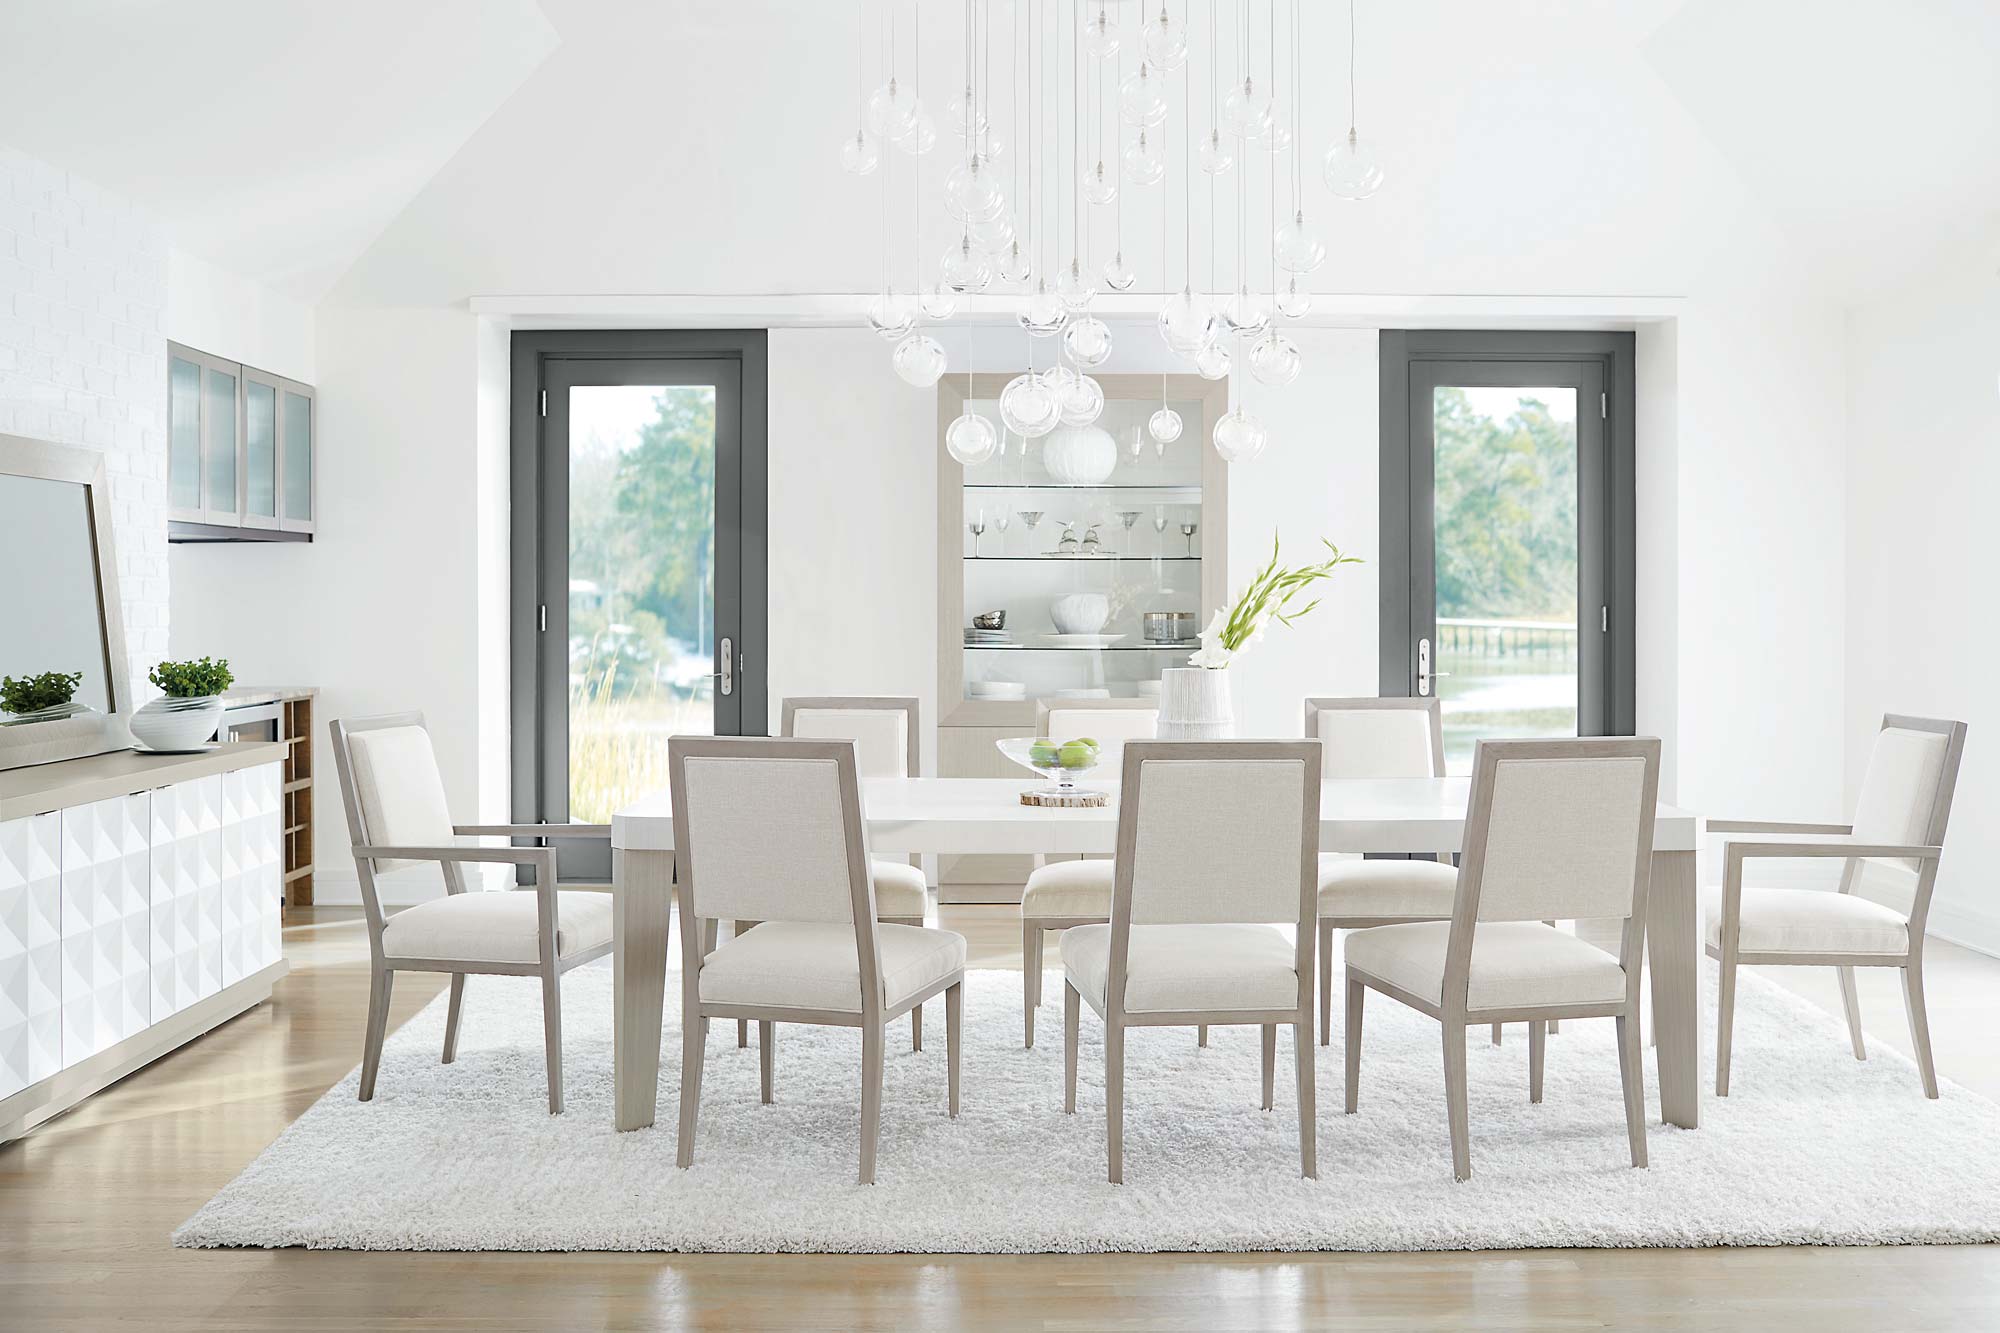 Timeless tables for hosting get-togethers and family suppers